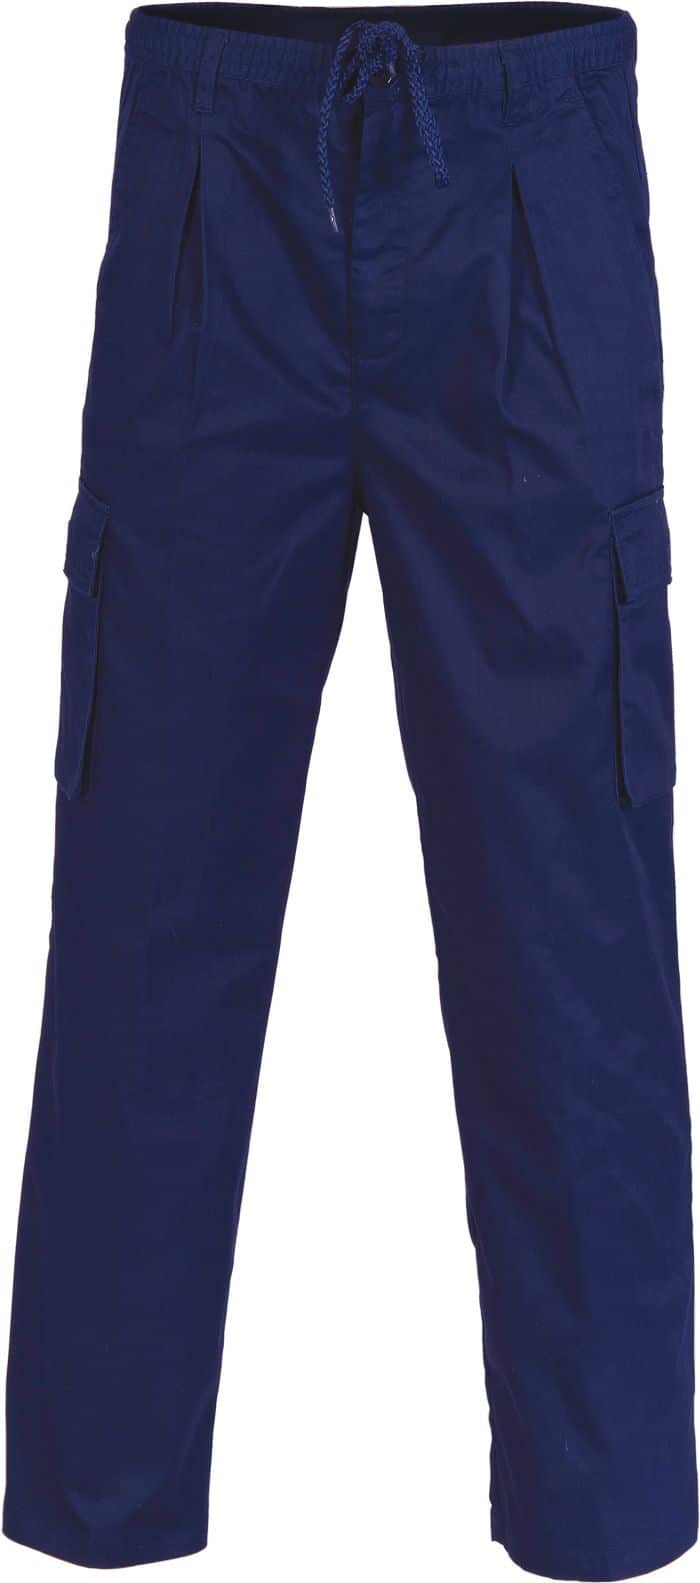 Unisex 3 in 1 Chefs Cargo Pants - 1504 | Ambition Workwear